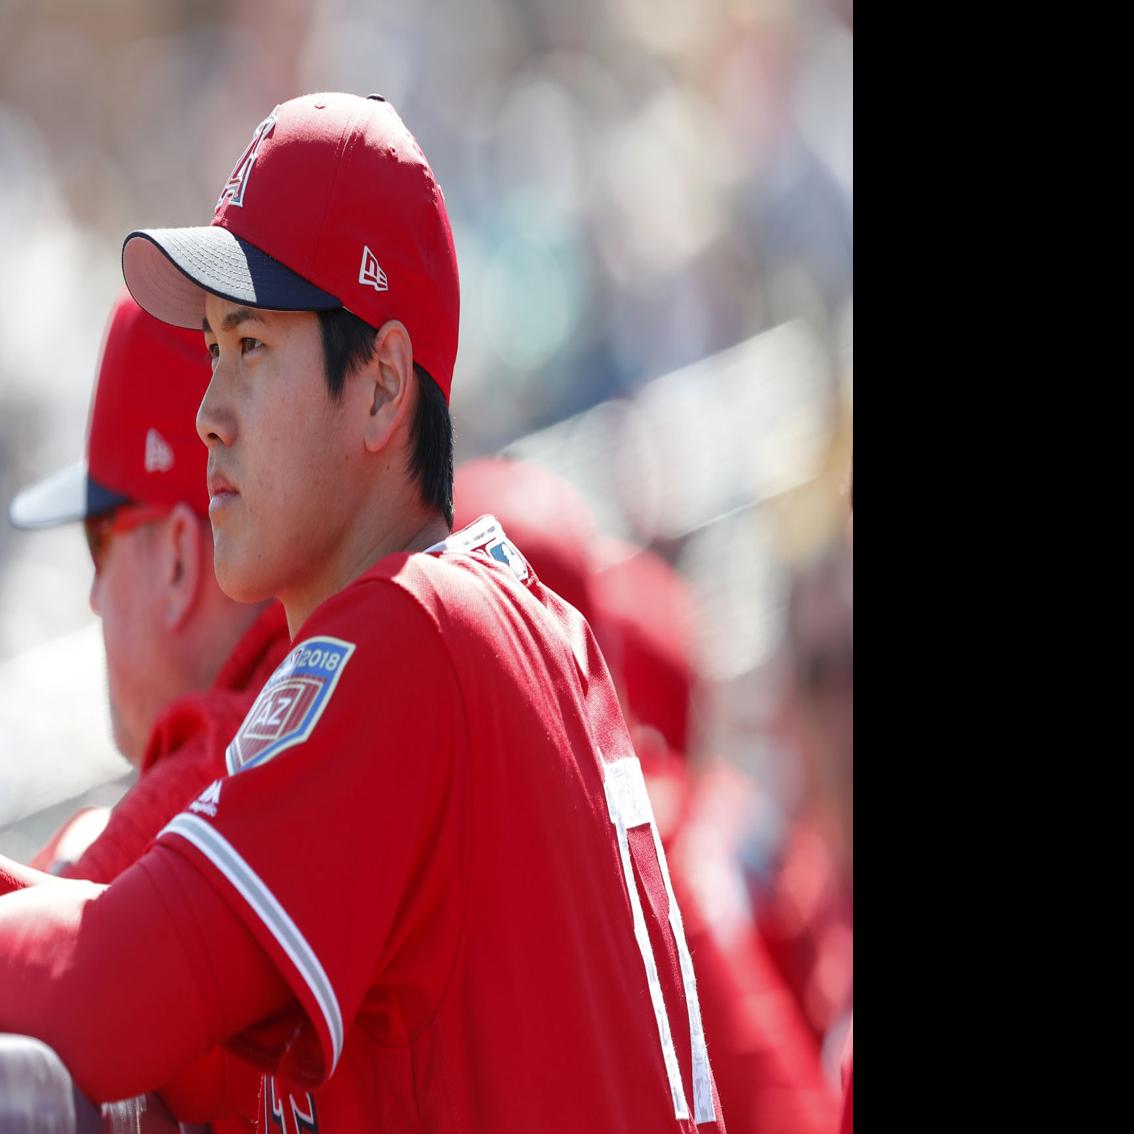 Los Angeles Angels pinch hitter Shohei Ohtani wears a jersey with